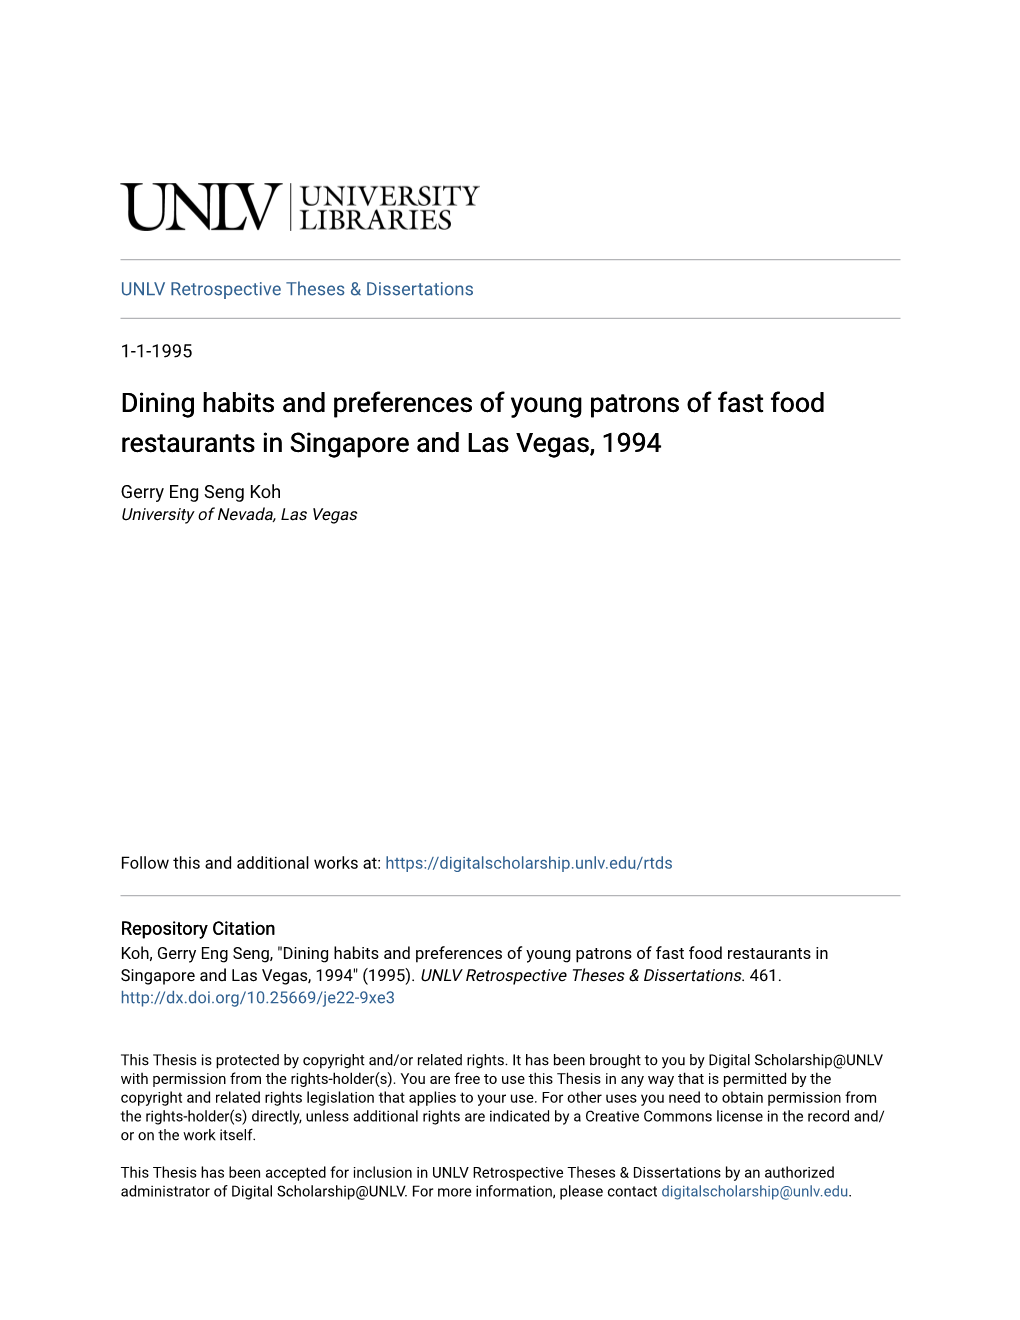 Dining Habits and Preferences of Young Patrons of Fast Food Restaurants in Singapore and Las Vegas, 1994